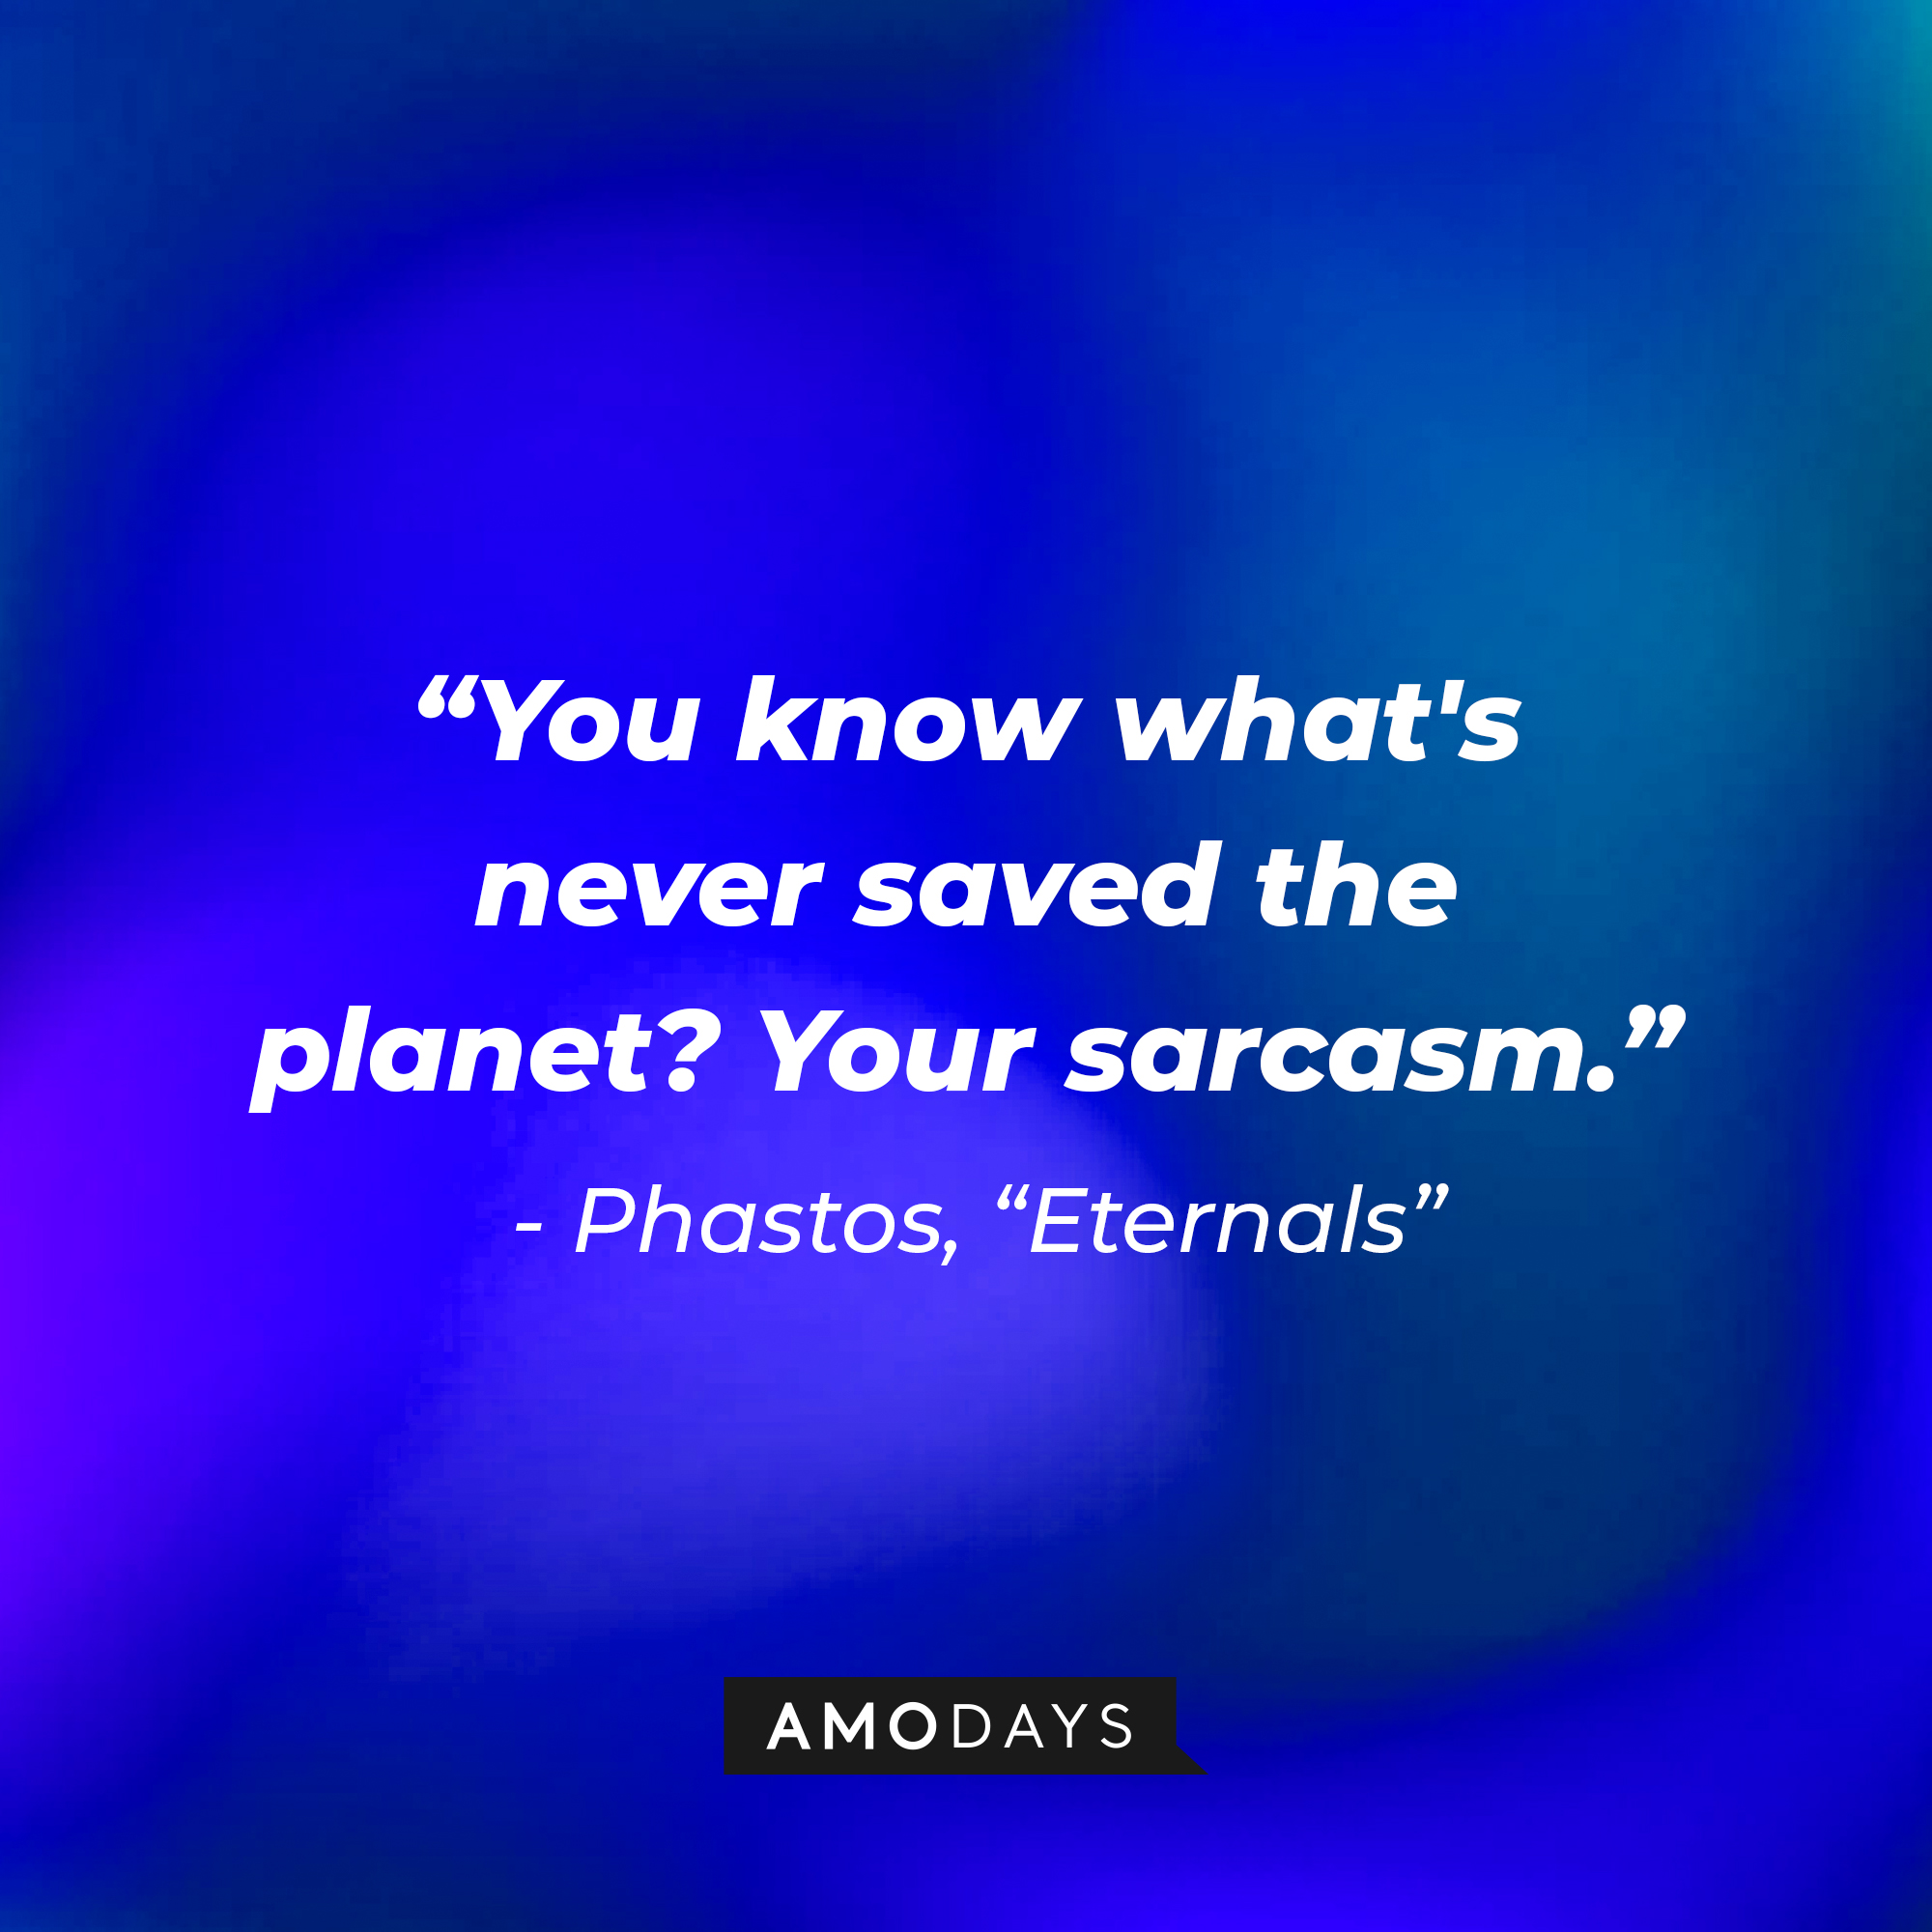 Phastos’ quote: "You know what's never saved the planet? Your sarcasm." | Image: AmoDays